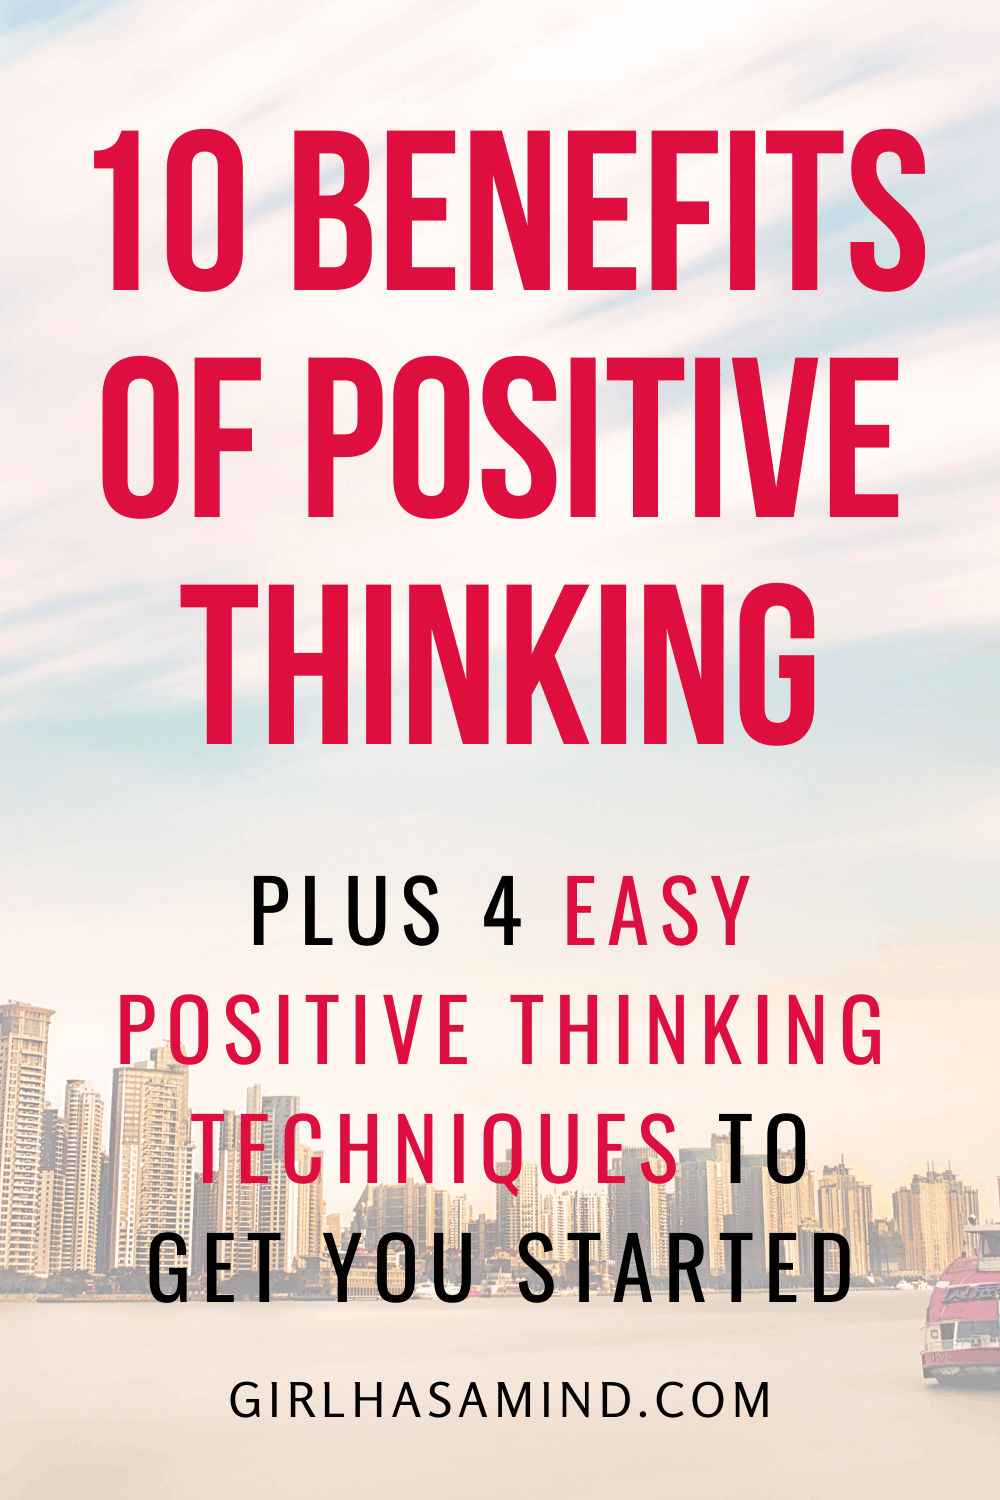 Benefits of Positive Thinking vs Side Effects of Negative Thinking